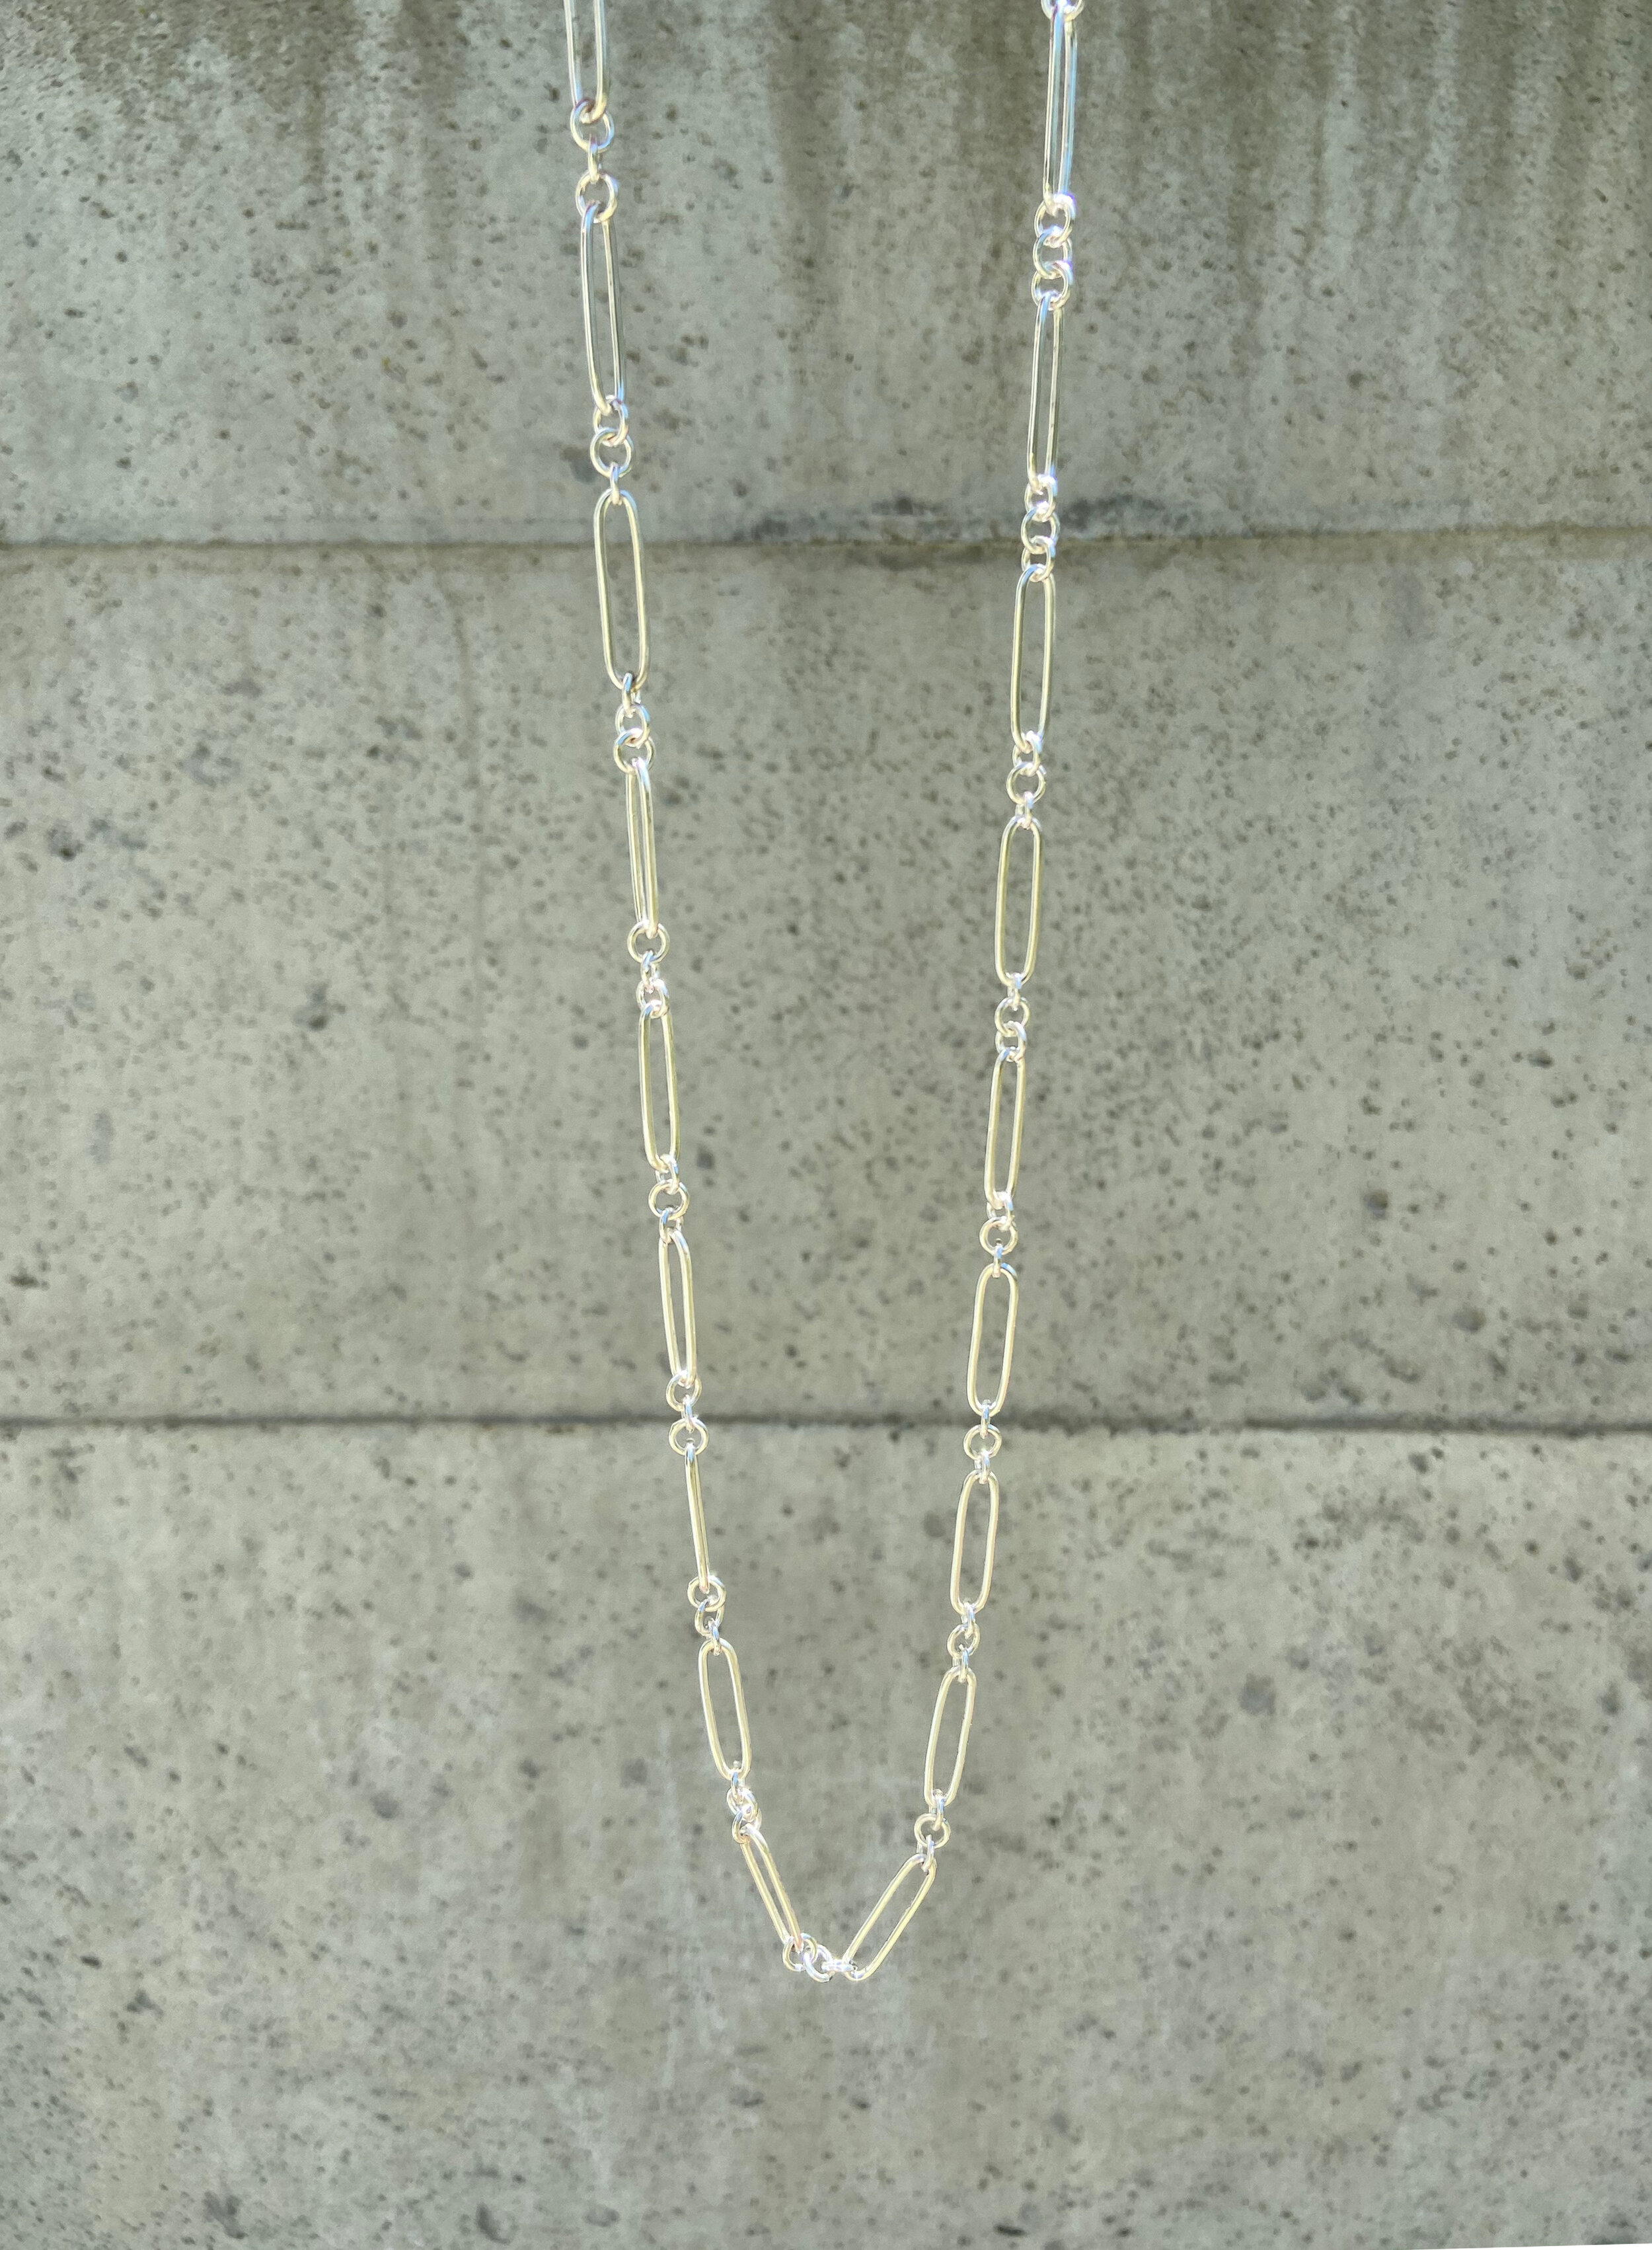 Trombone Necklace Silver Plated 18" Chain 